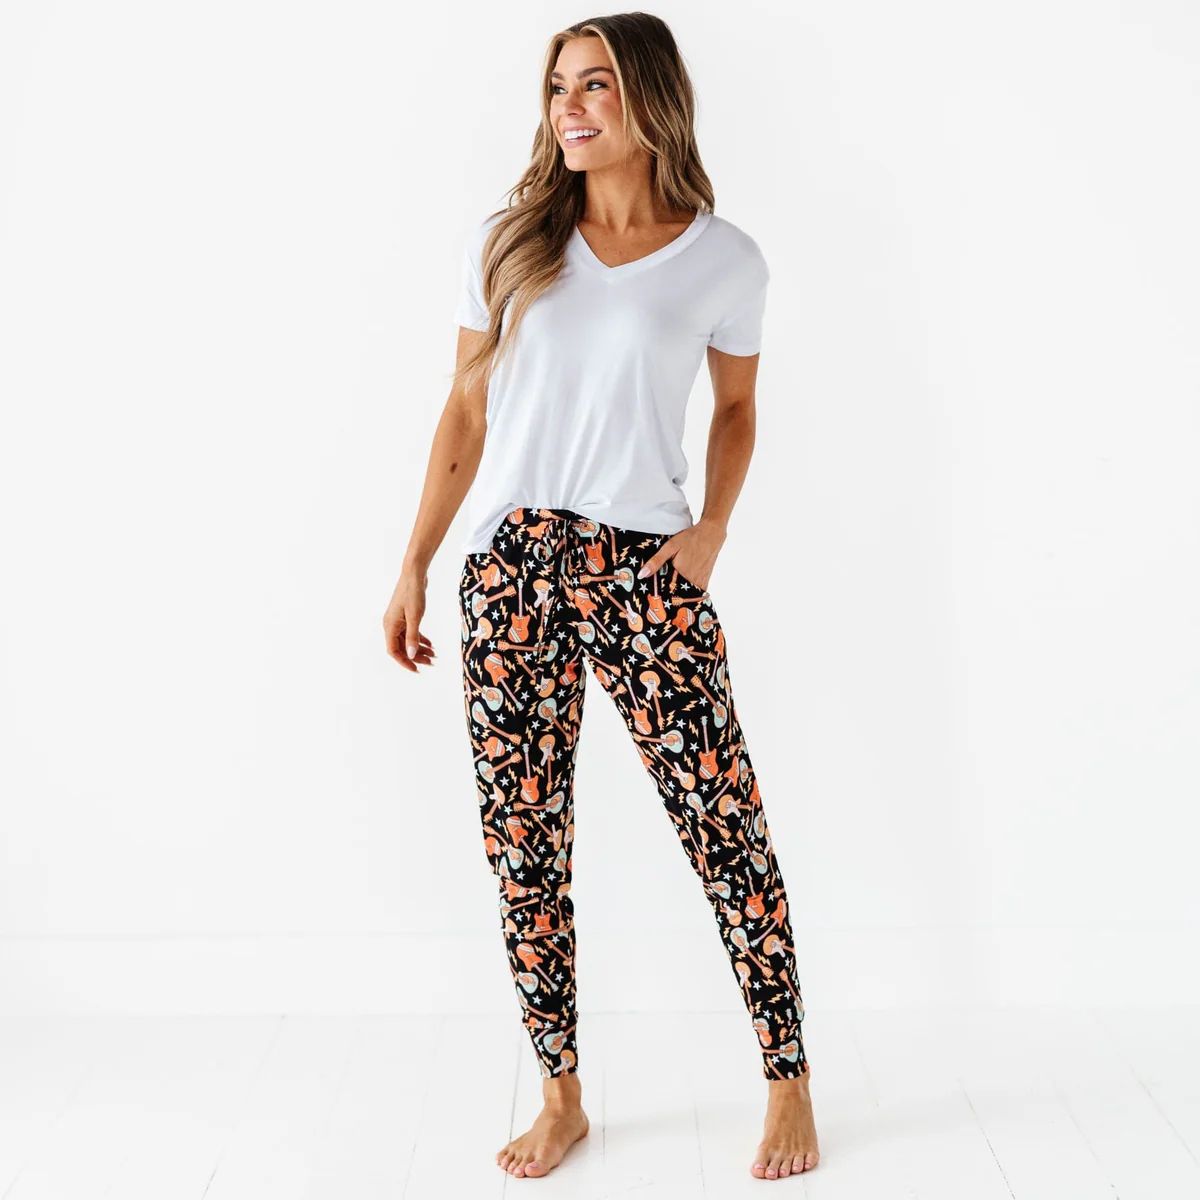 Caught in a Jam Women's Pants | Bums & Roses